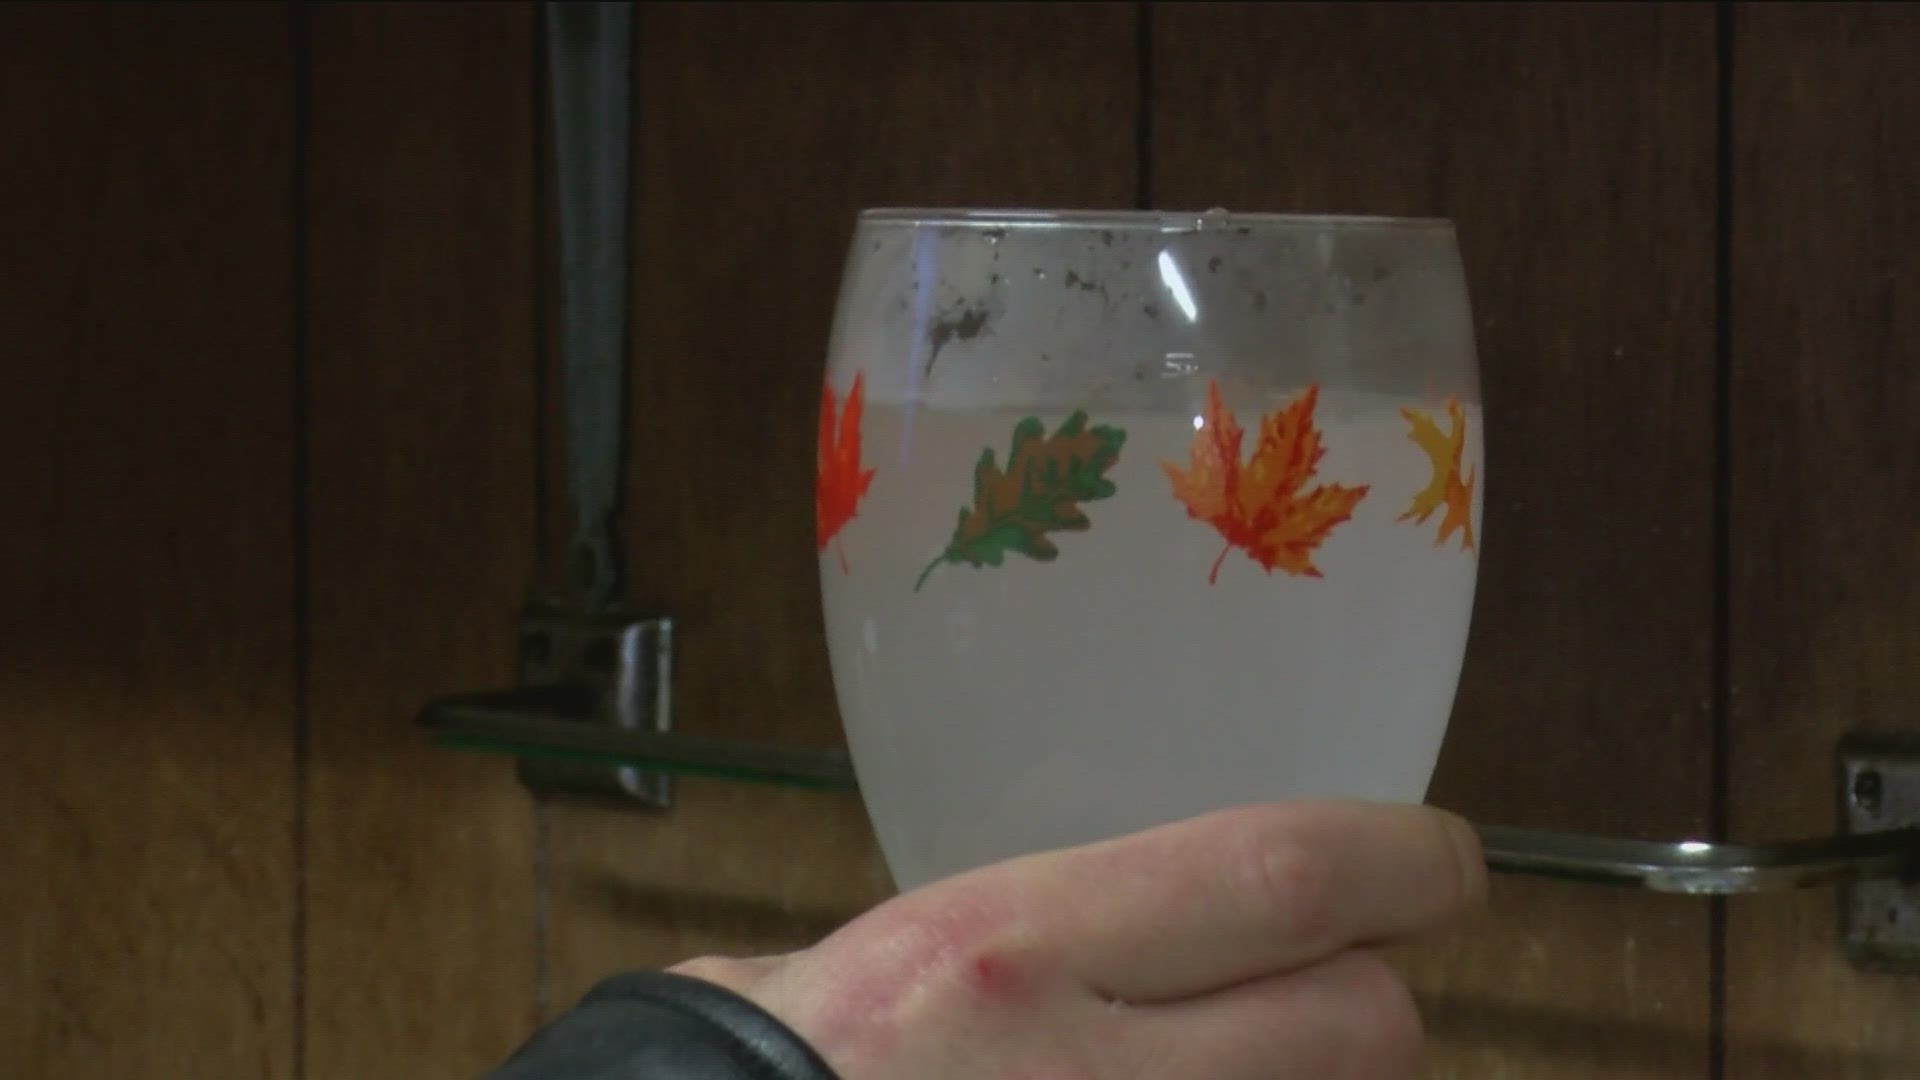 Fostoria residents describe their water as tasting like old musty rags, dirt and recently chlorine. Despite the taste, city officials say the water is safe.